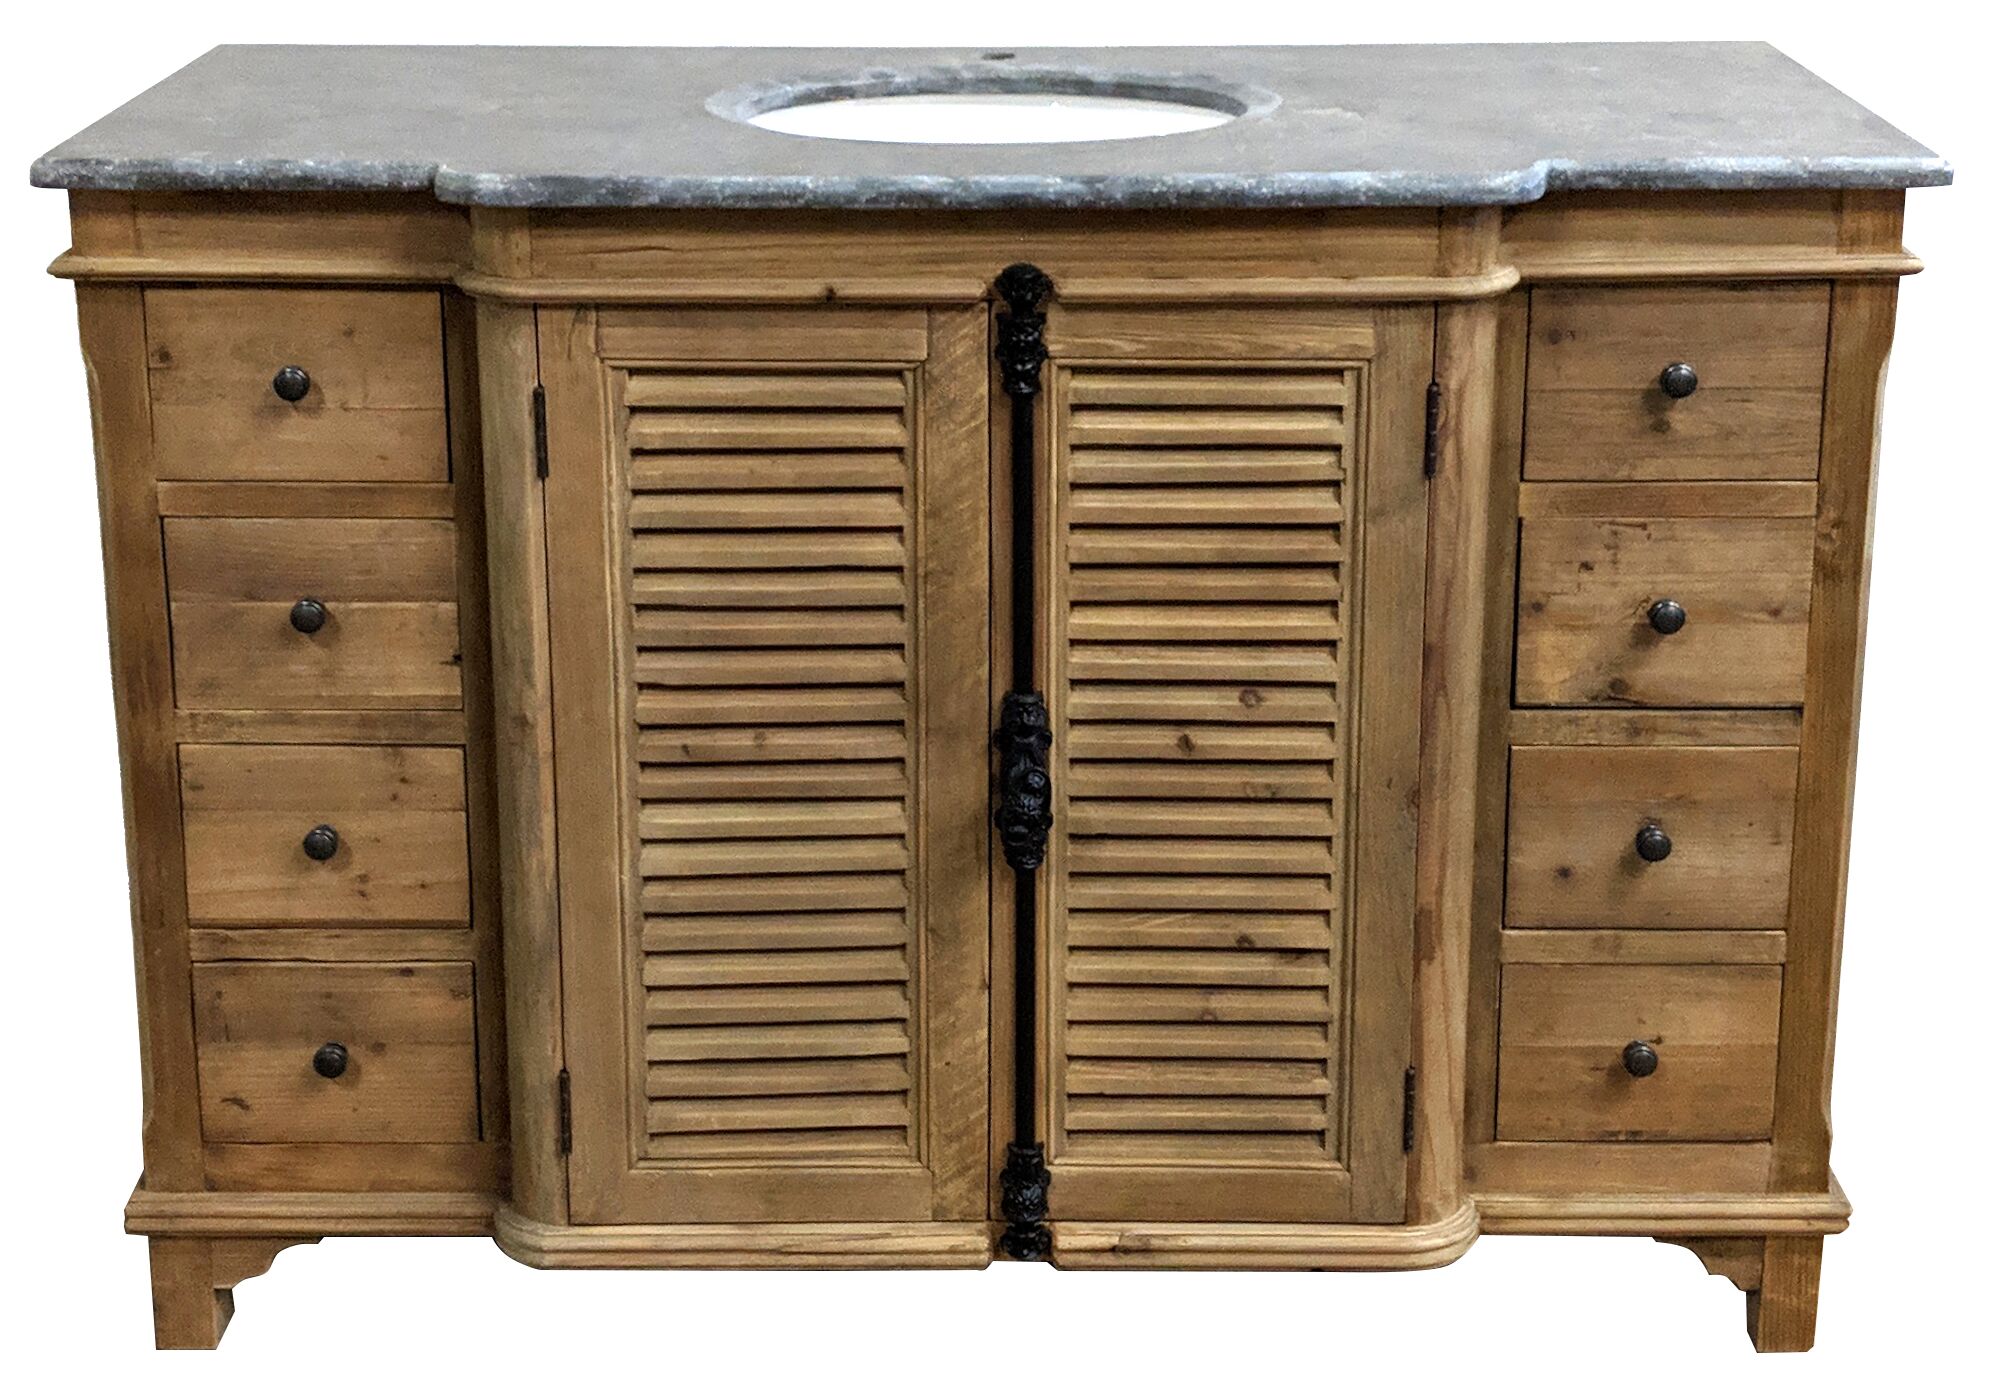 51" Handcrafted Reclaimed Pine Solid Wood Single Breakfront Bath Vanity Natural Finish